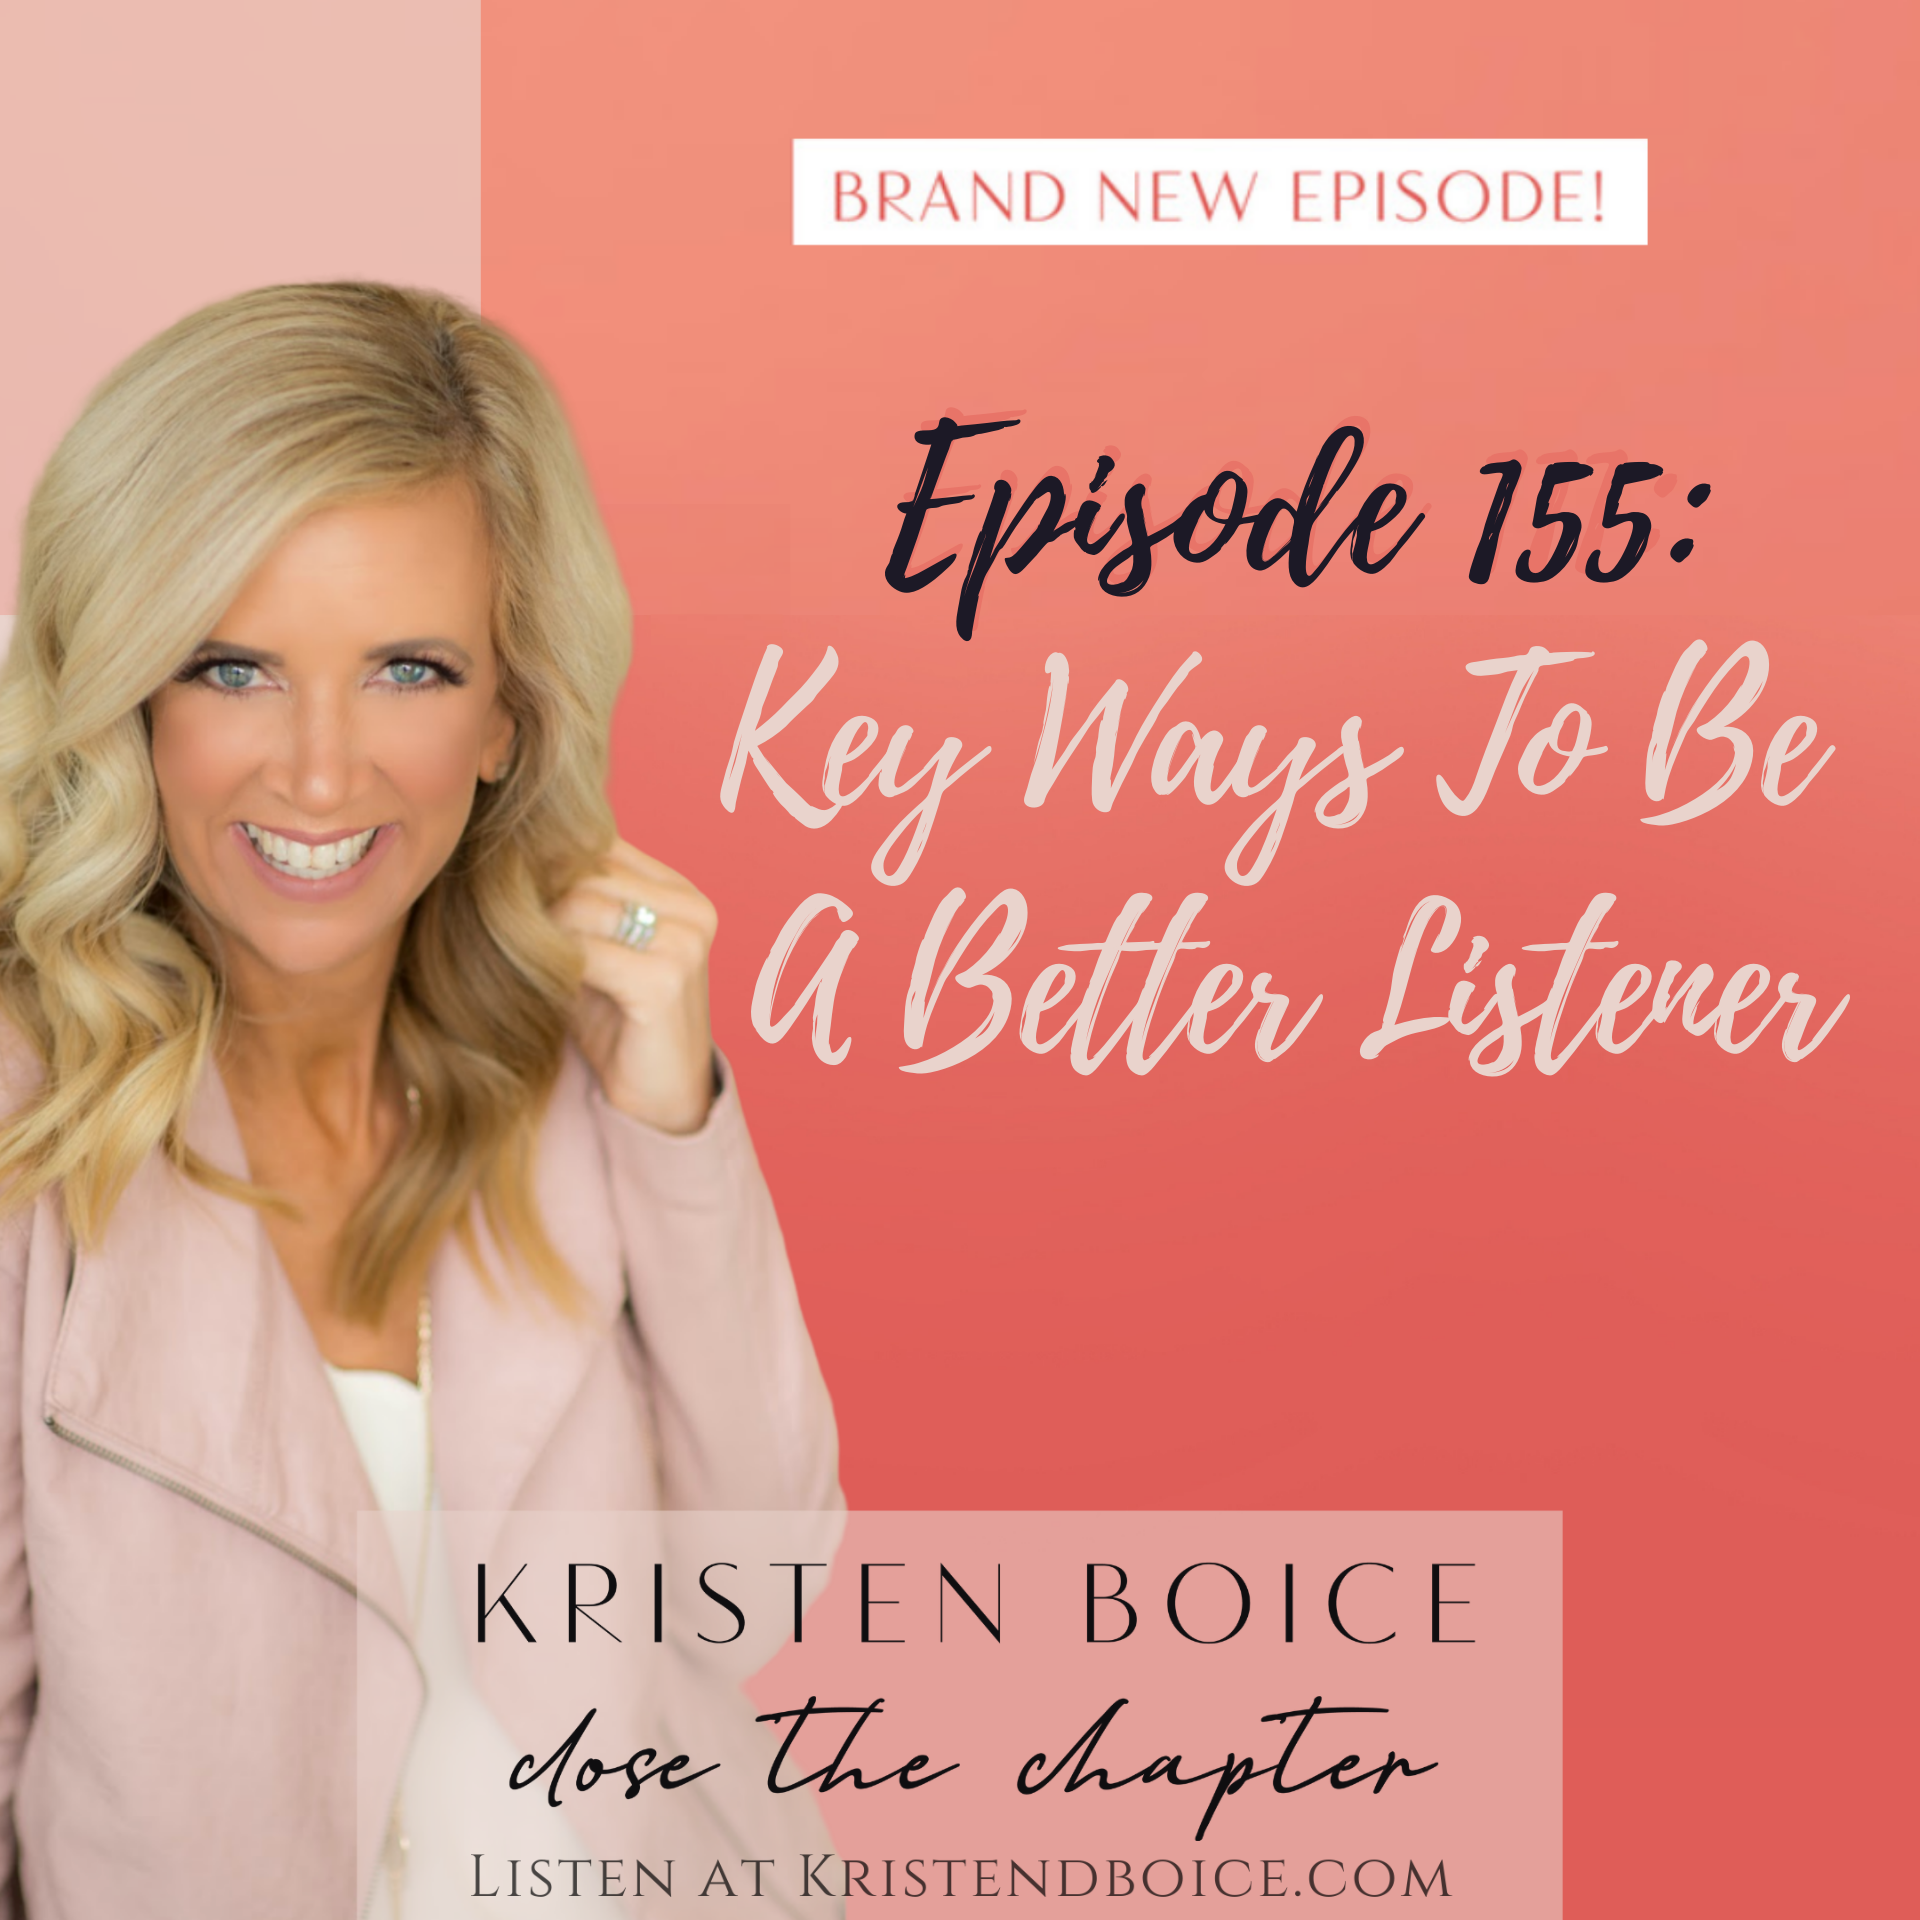 Episode 155 Key Ways to Be A Better Listener. (1)